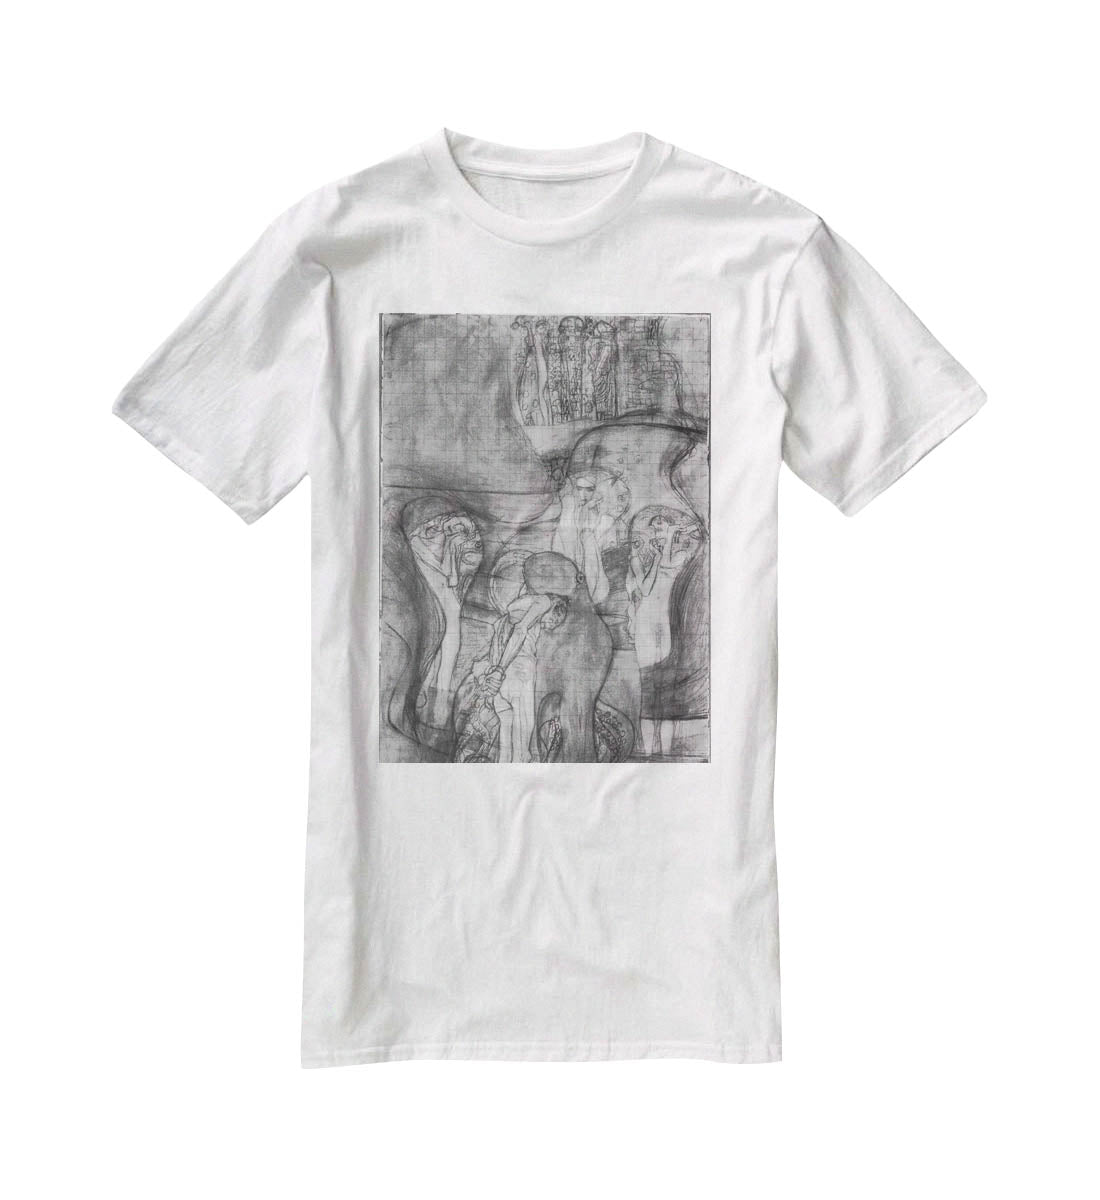 Composition draft of the law faculty image by Klimt T-Shirt - Canvas Art Rocks - 5